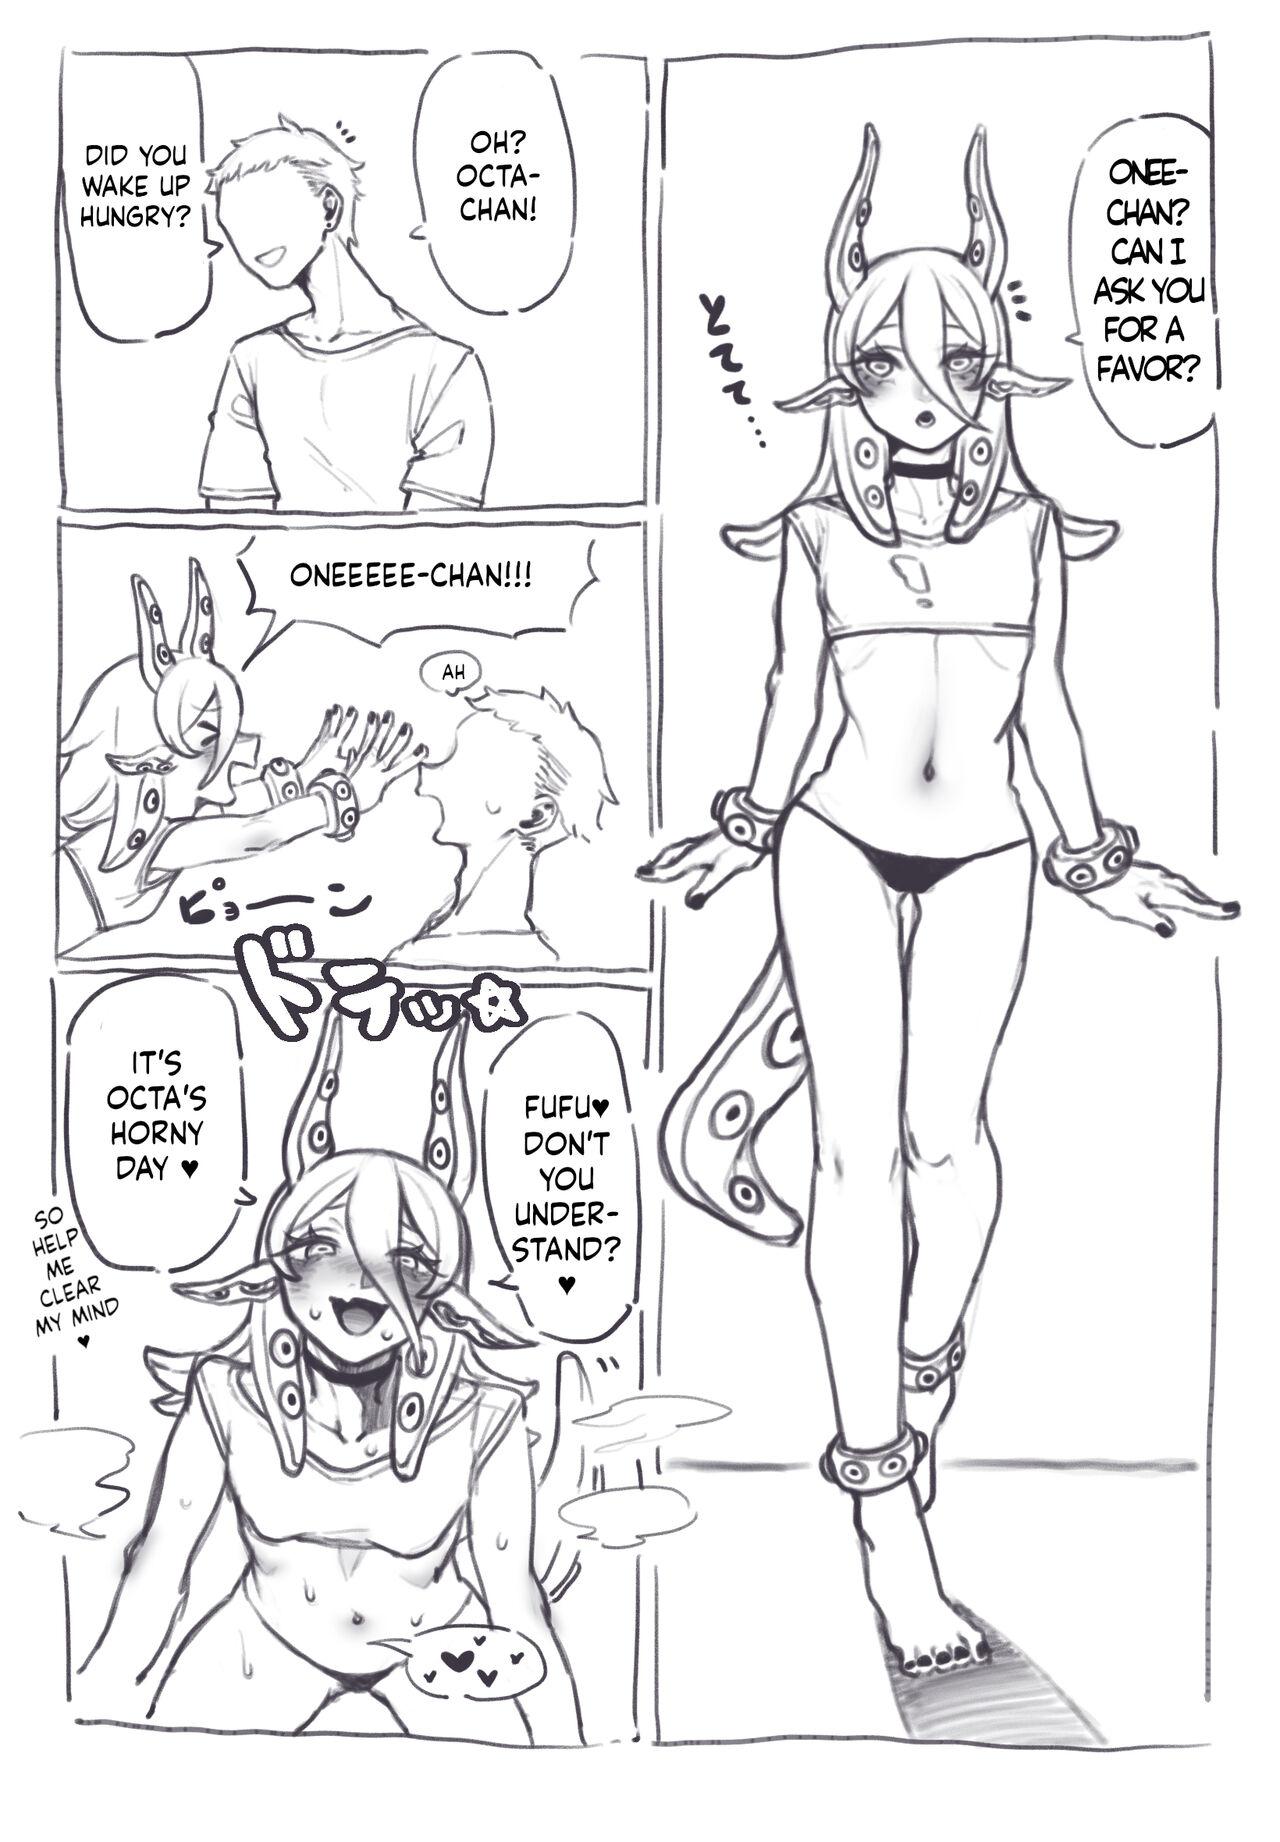 Onlyfans オクタちゃんとえつ するだけの漫画 Sexy - Page 2